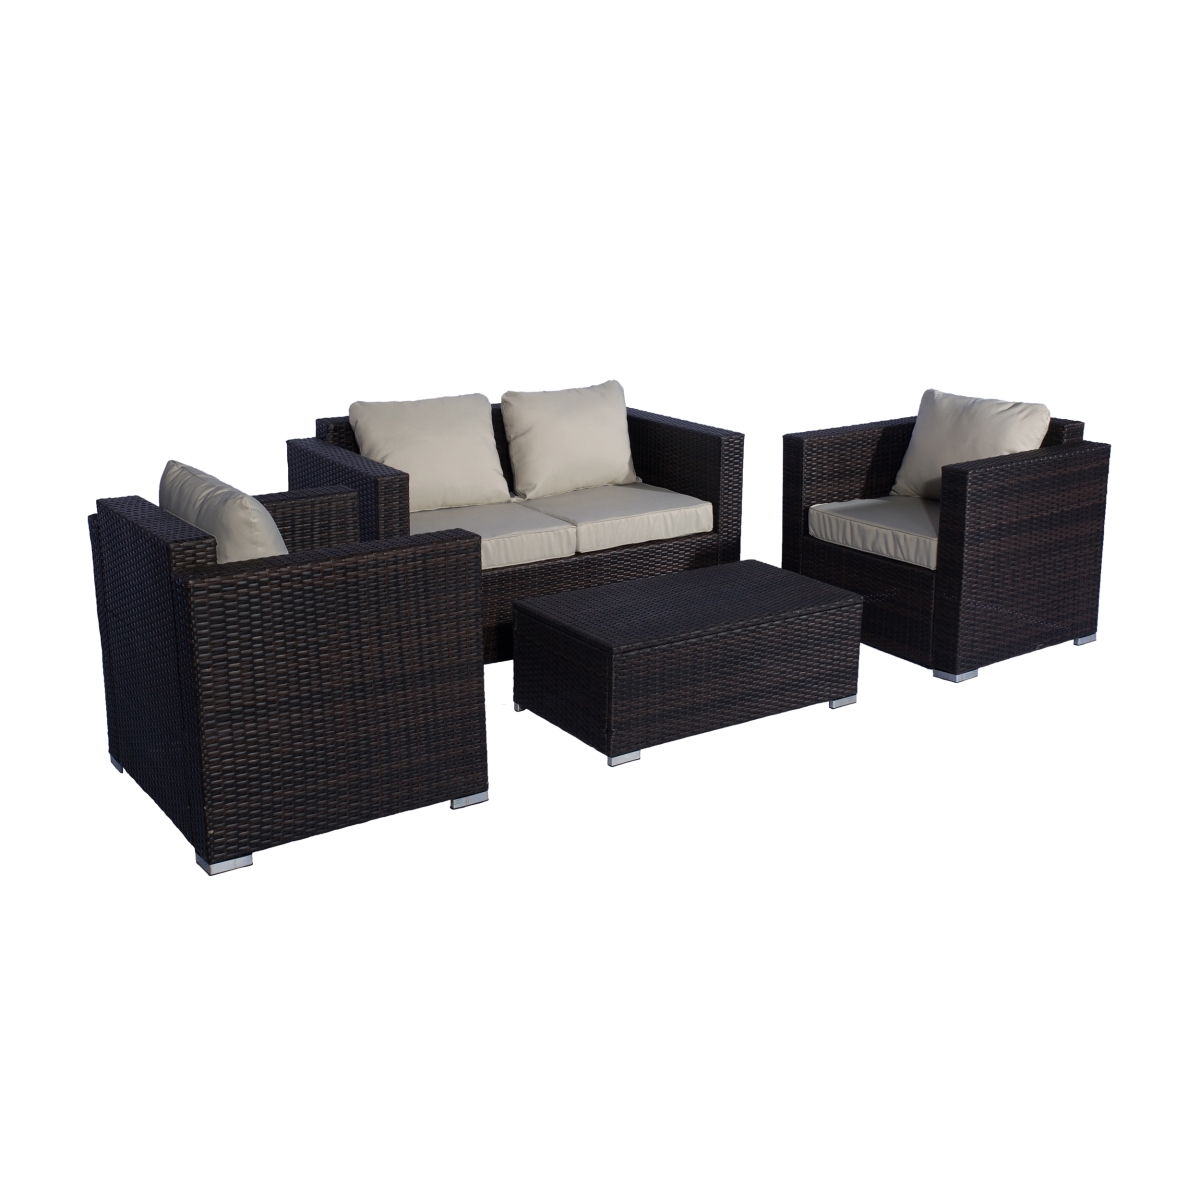 P153-02 Contemporary Sofa Set With Cushions, Beige - 4 Piece